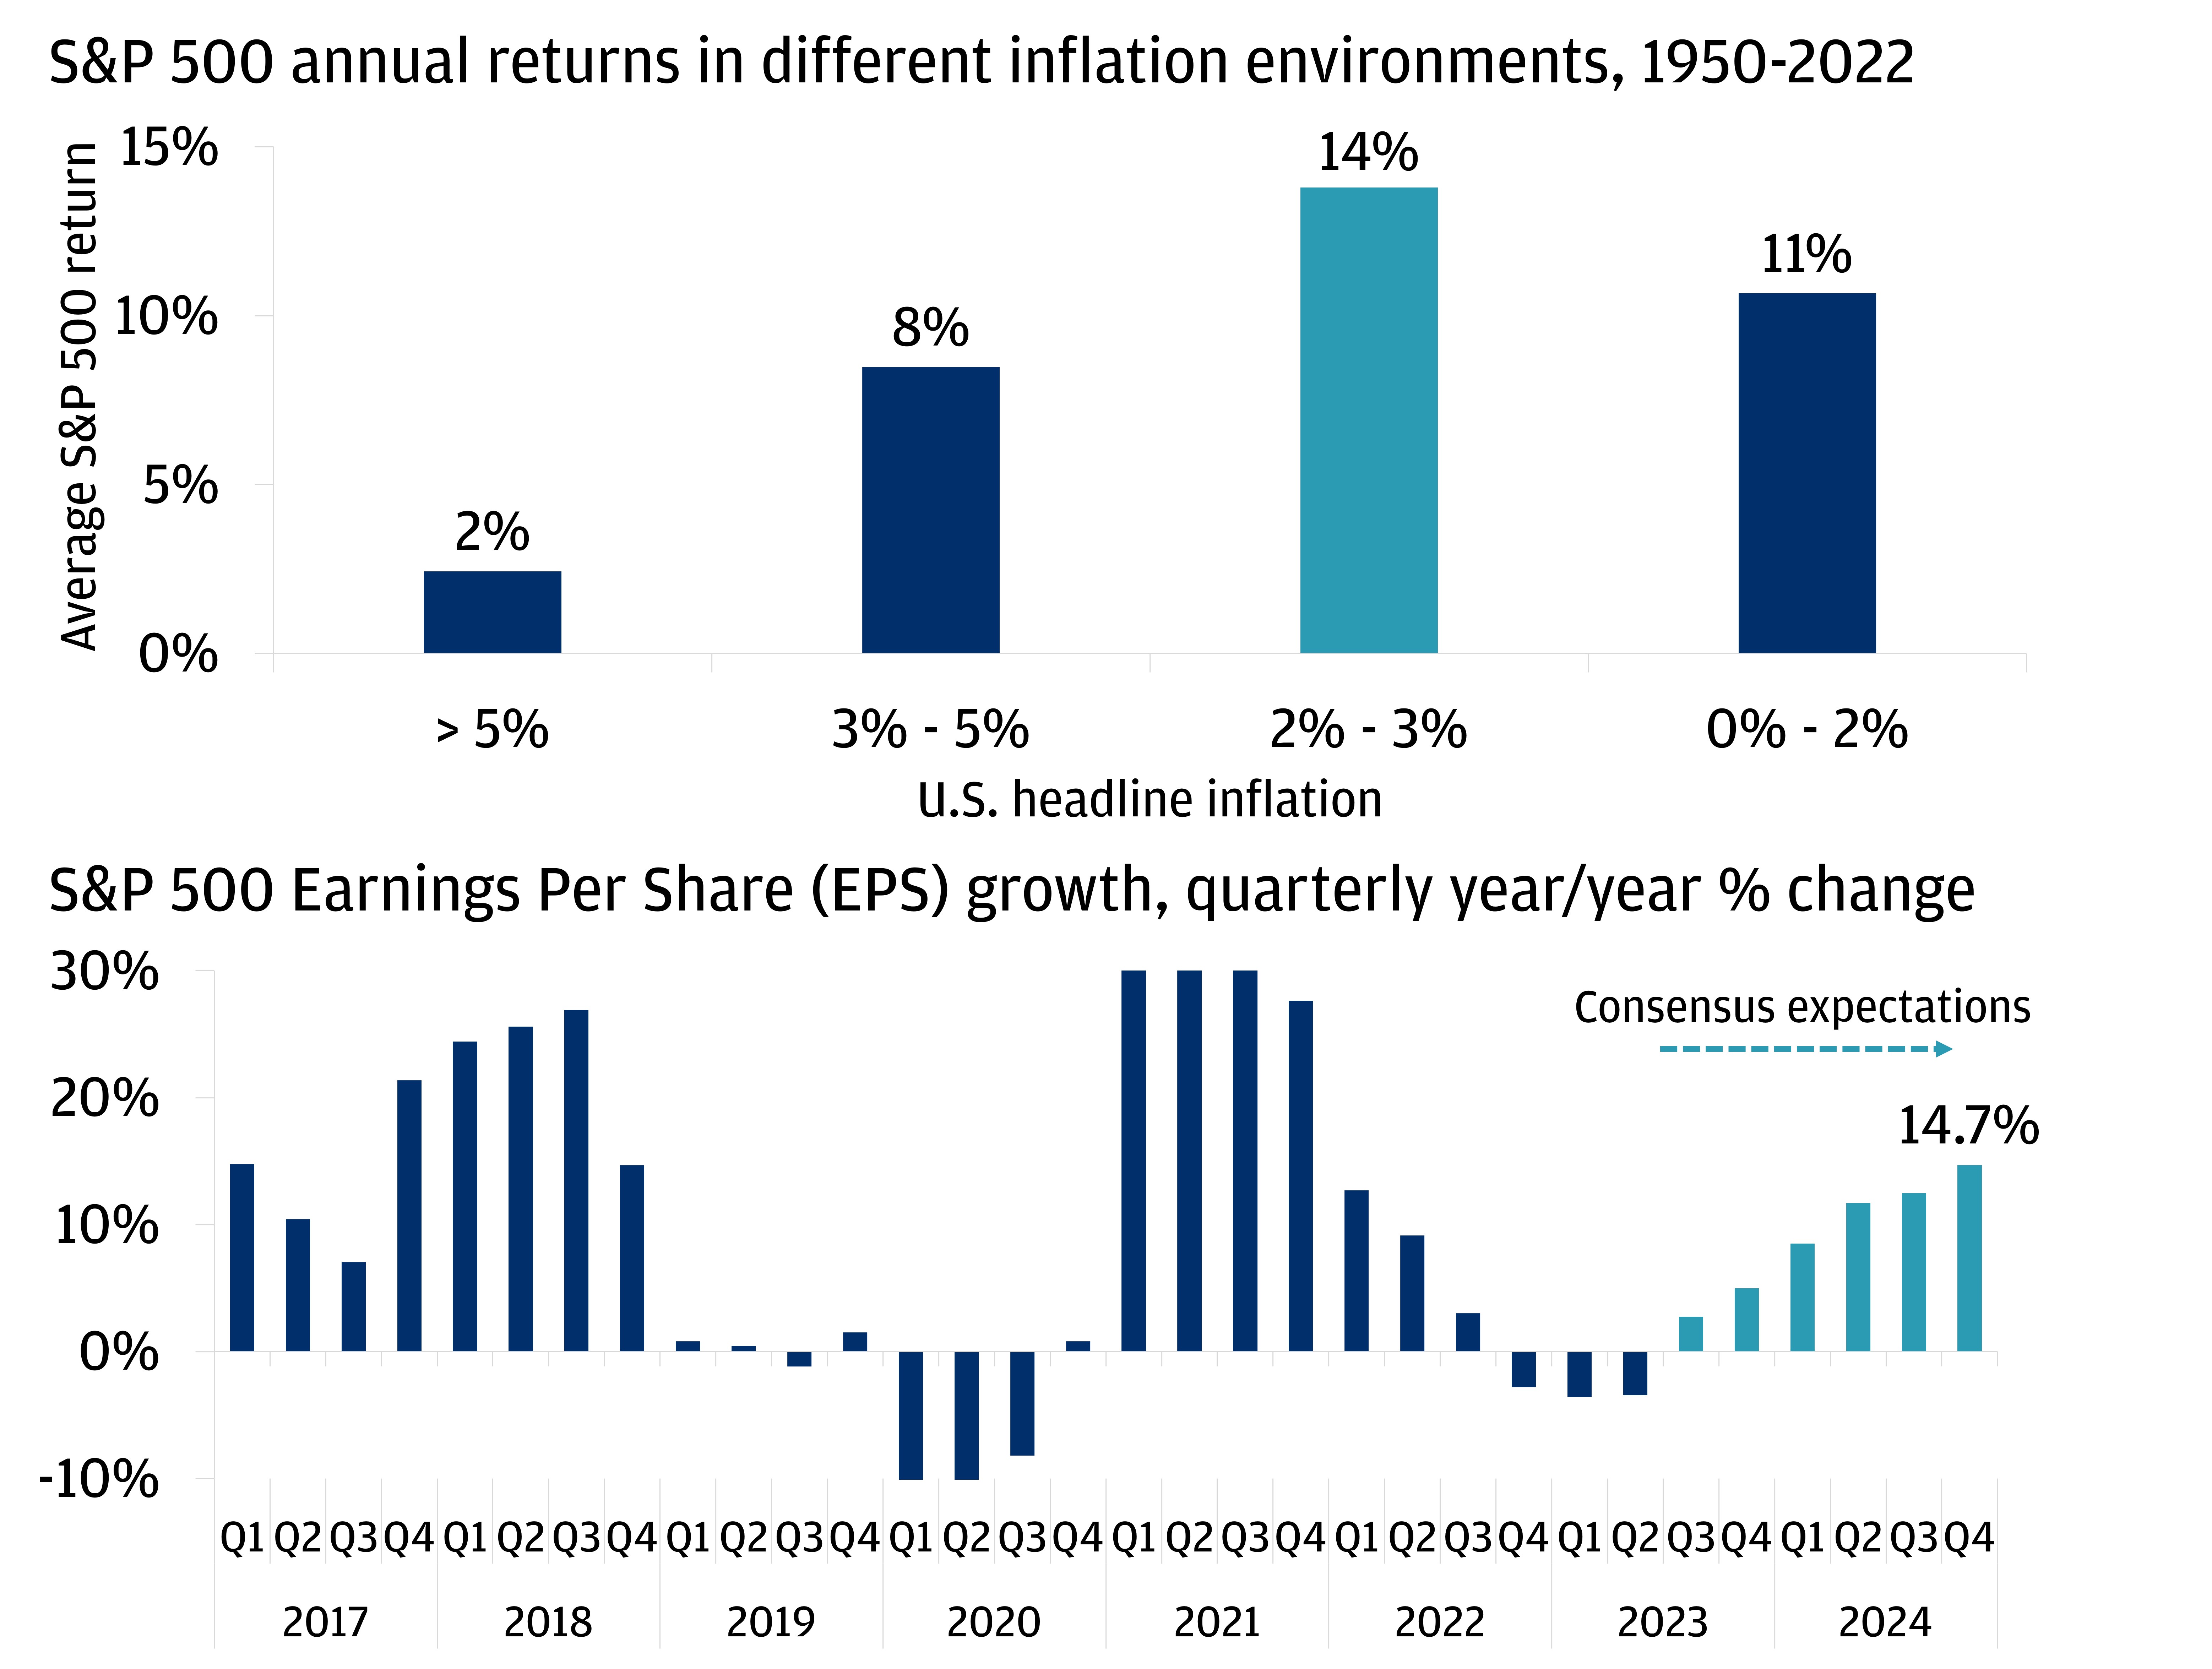 The chart shows two graphics. On top are the S&P 500 annual returns in different inflation environments from 1950 to 2022. The bottom chart is S&P 500 Earnings Per Share (EPS) growth, year-over-year % change back to 2017.